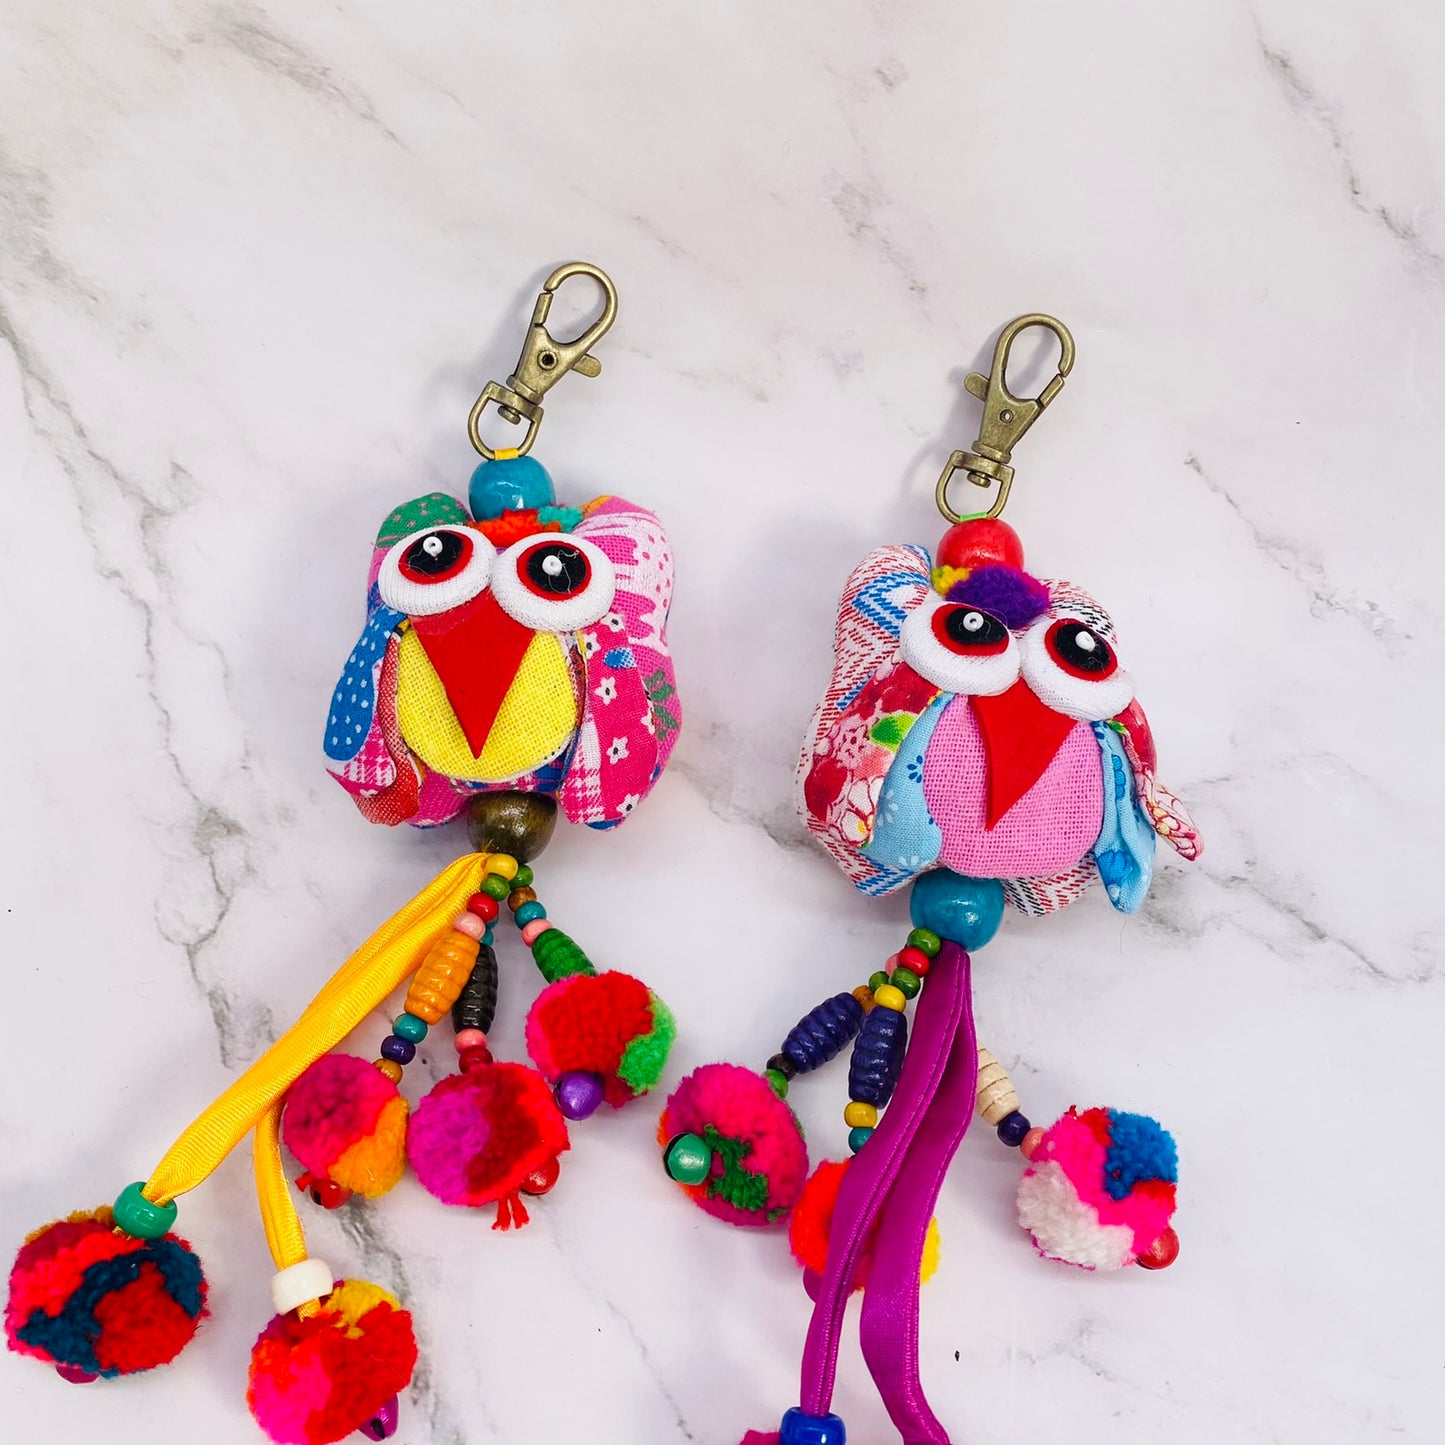 Owl Keychain, Colorful Owl Bag charm, Bag Accessories, Handmade Bag Charm, Cute Key Ring, Gift for Her, Symbol of wisdom